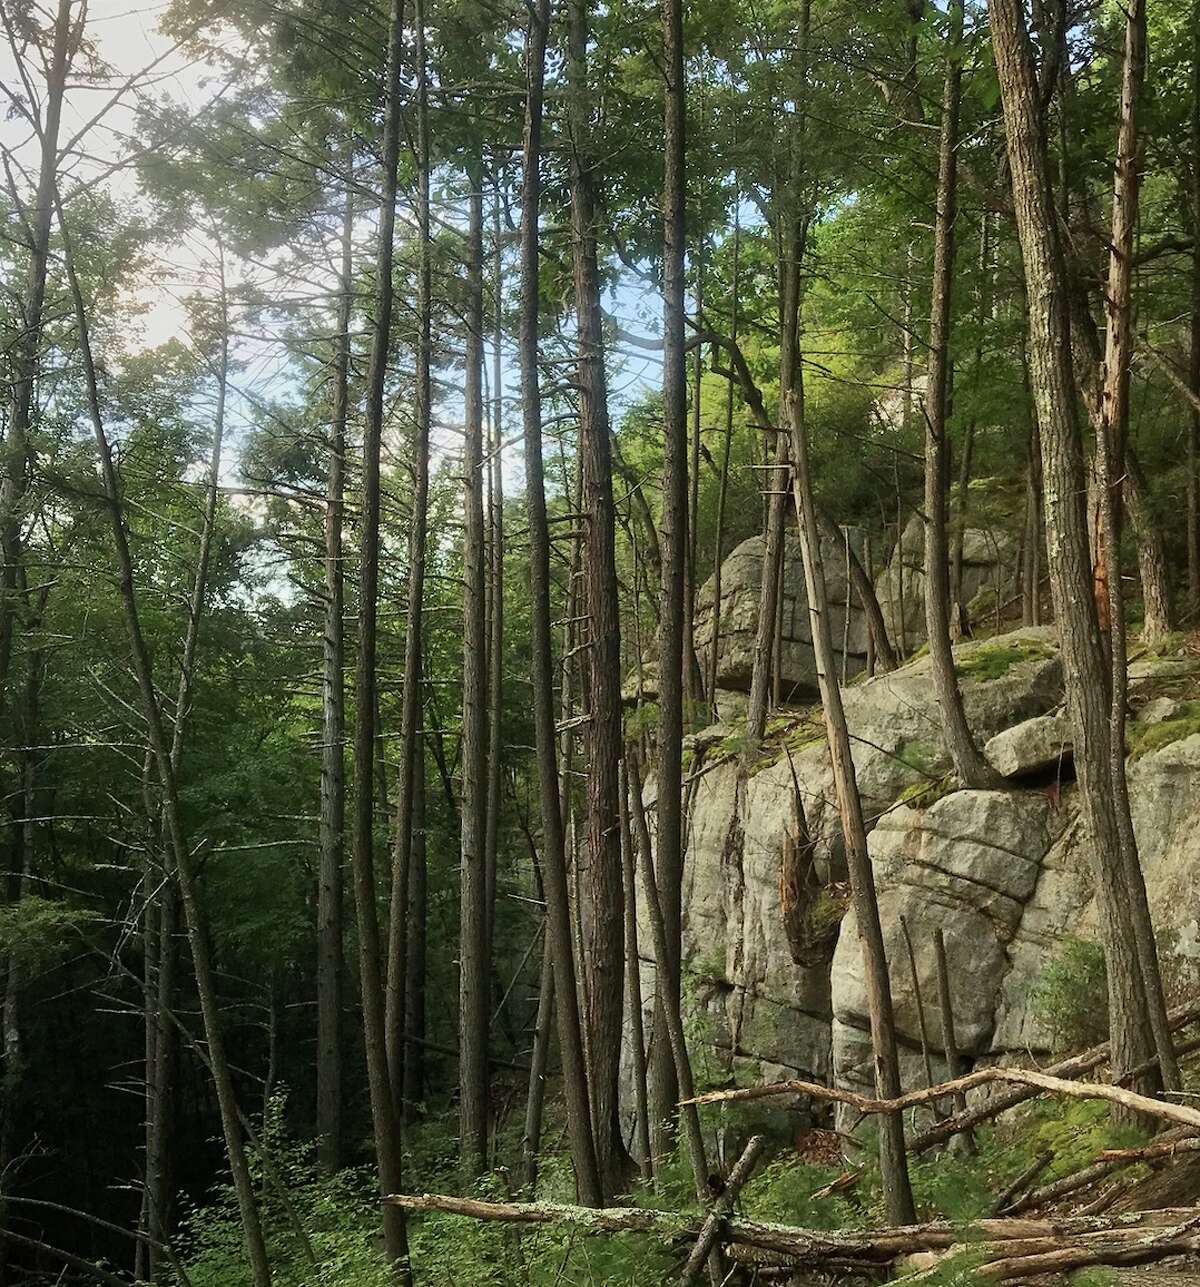 Over 71 acres of the Shawangunk Ridge have been permanently protected by the Mohonk Preserve and The Shawangunk Conservancy.